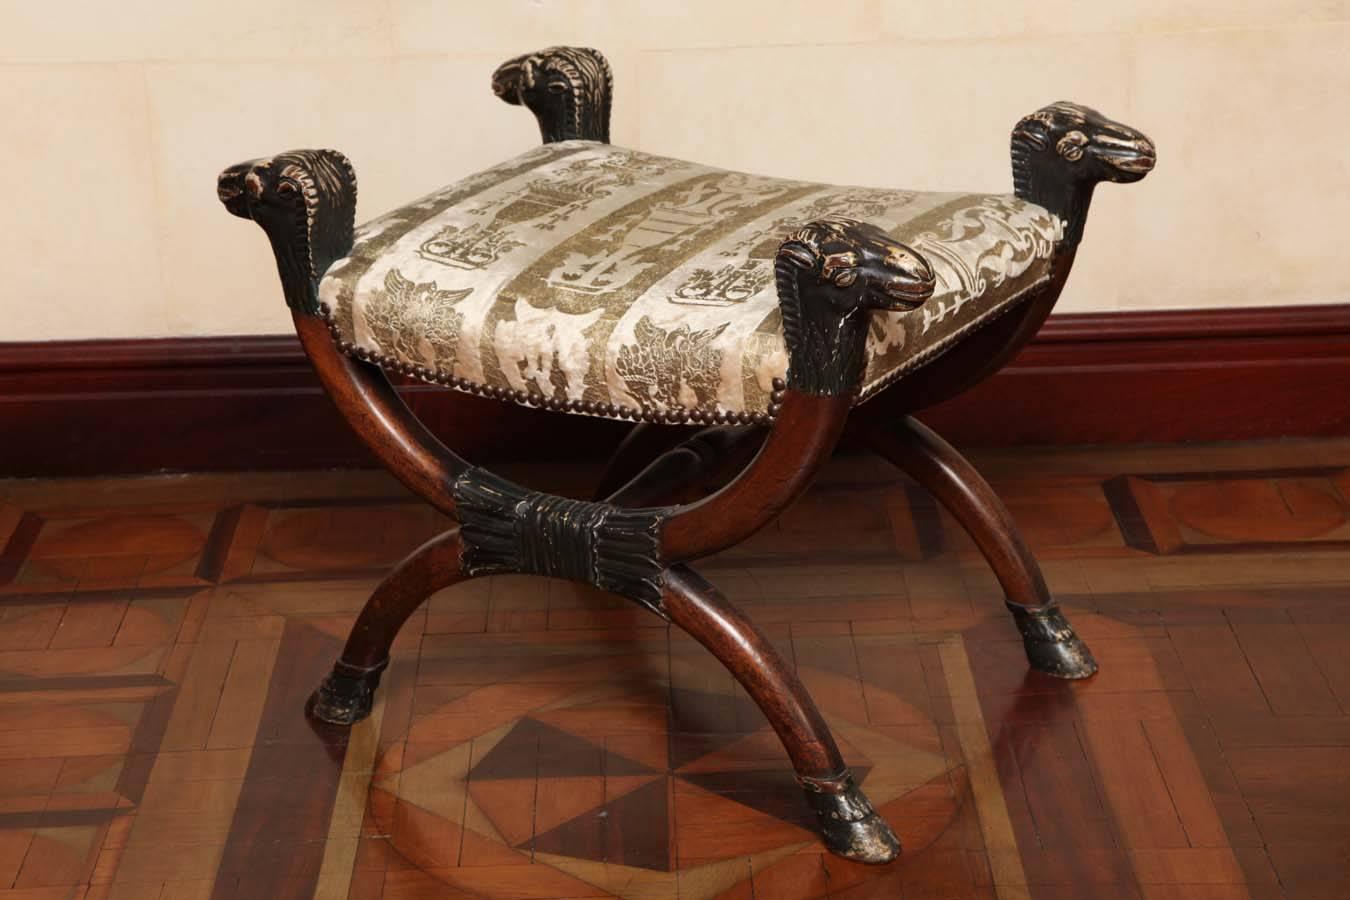 The velvet-upholstered seat on an X-form support with four sheep heads and joined by a turned baluster stretcher on hoof feet. 

The 